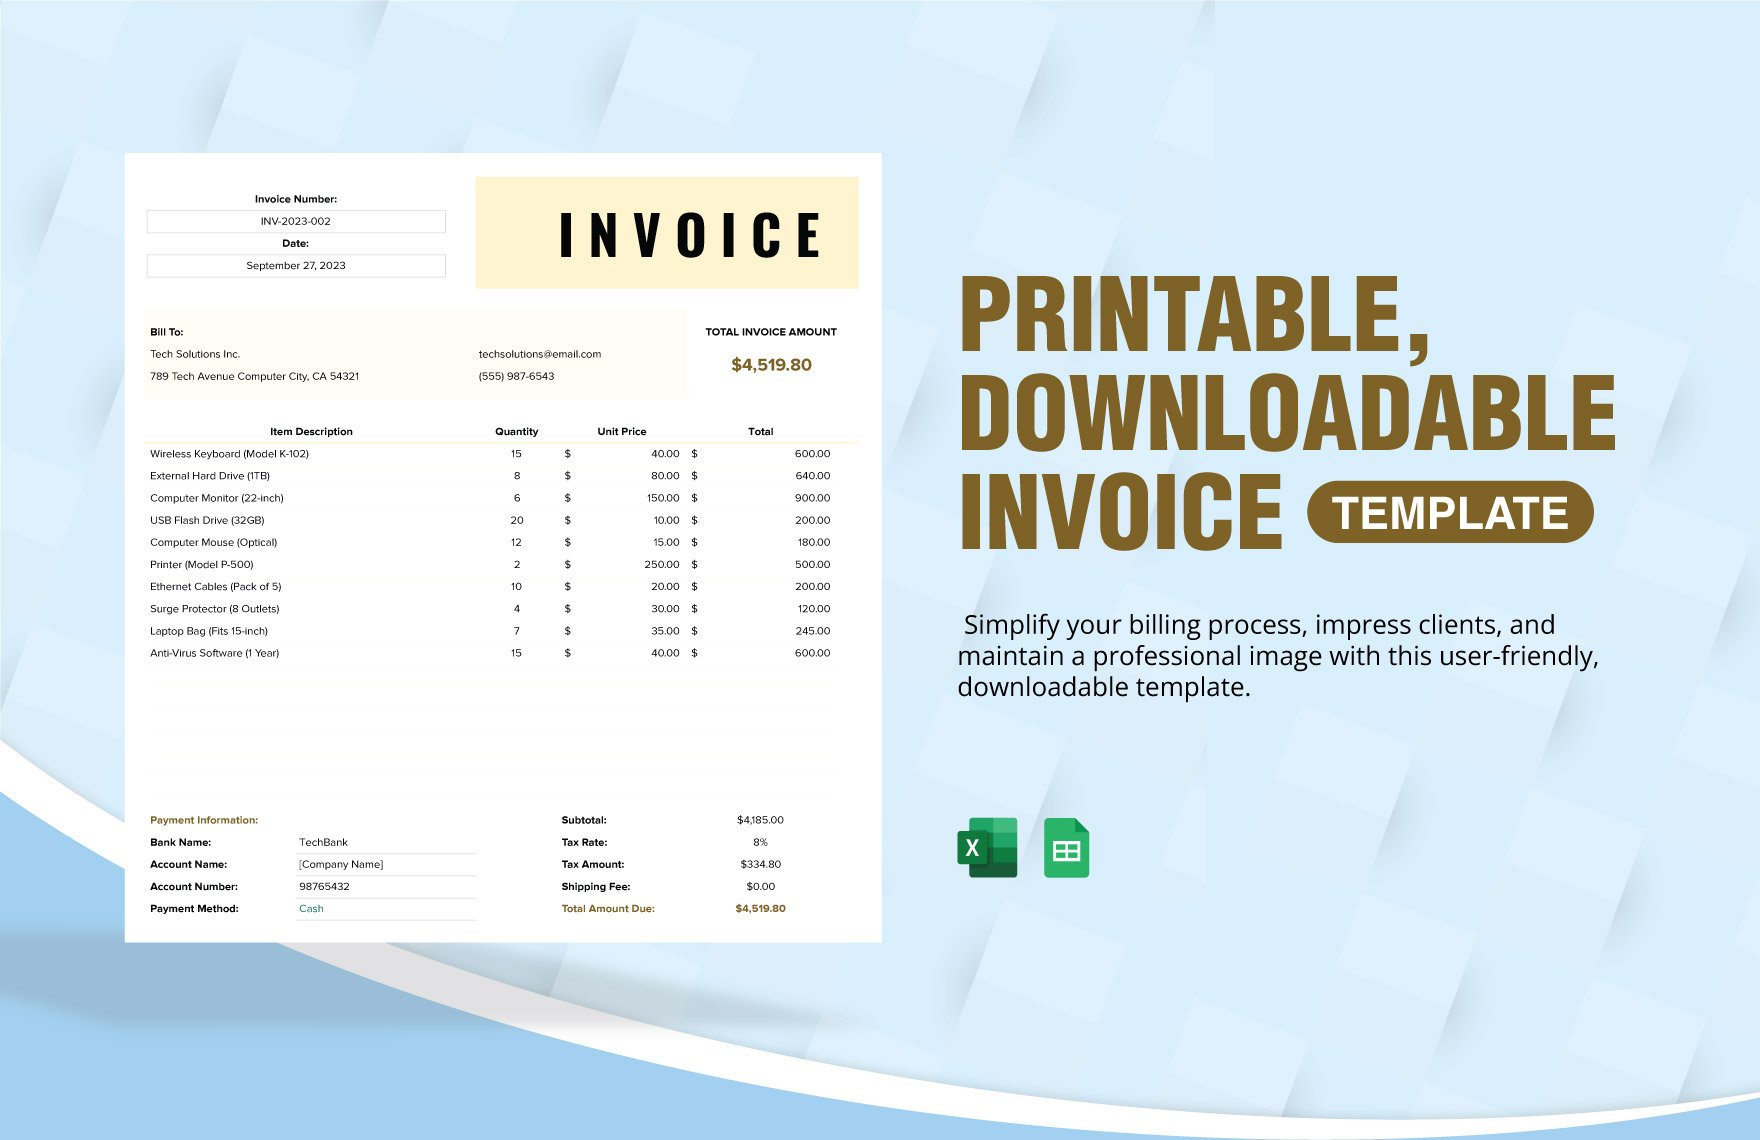 Free Printable, Downloadable Invoice Template